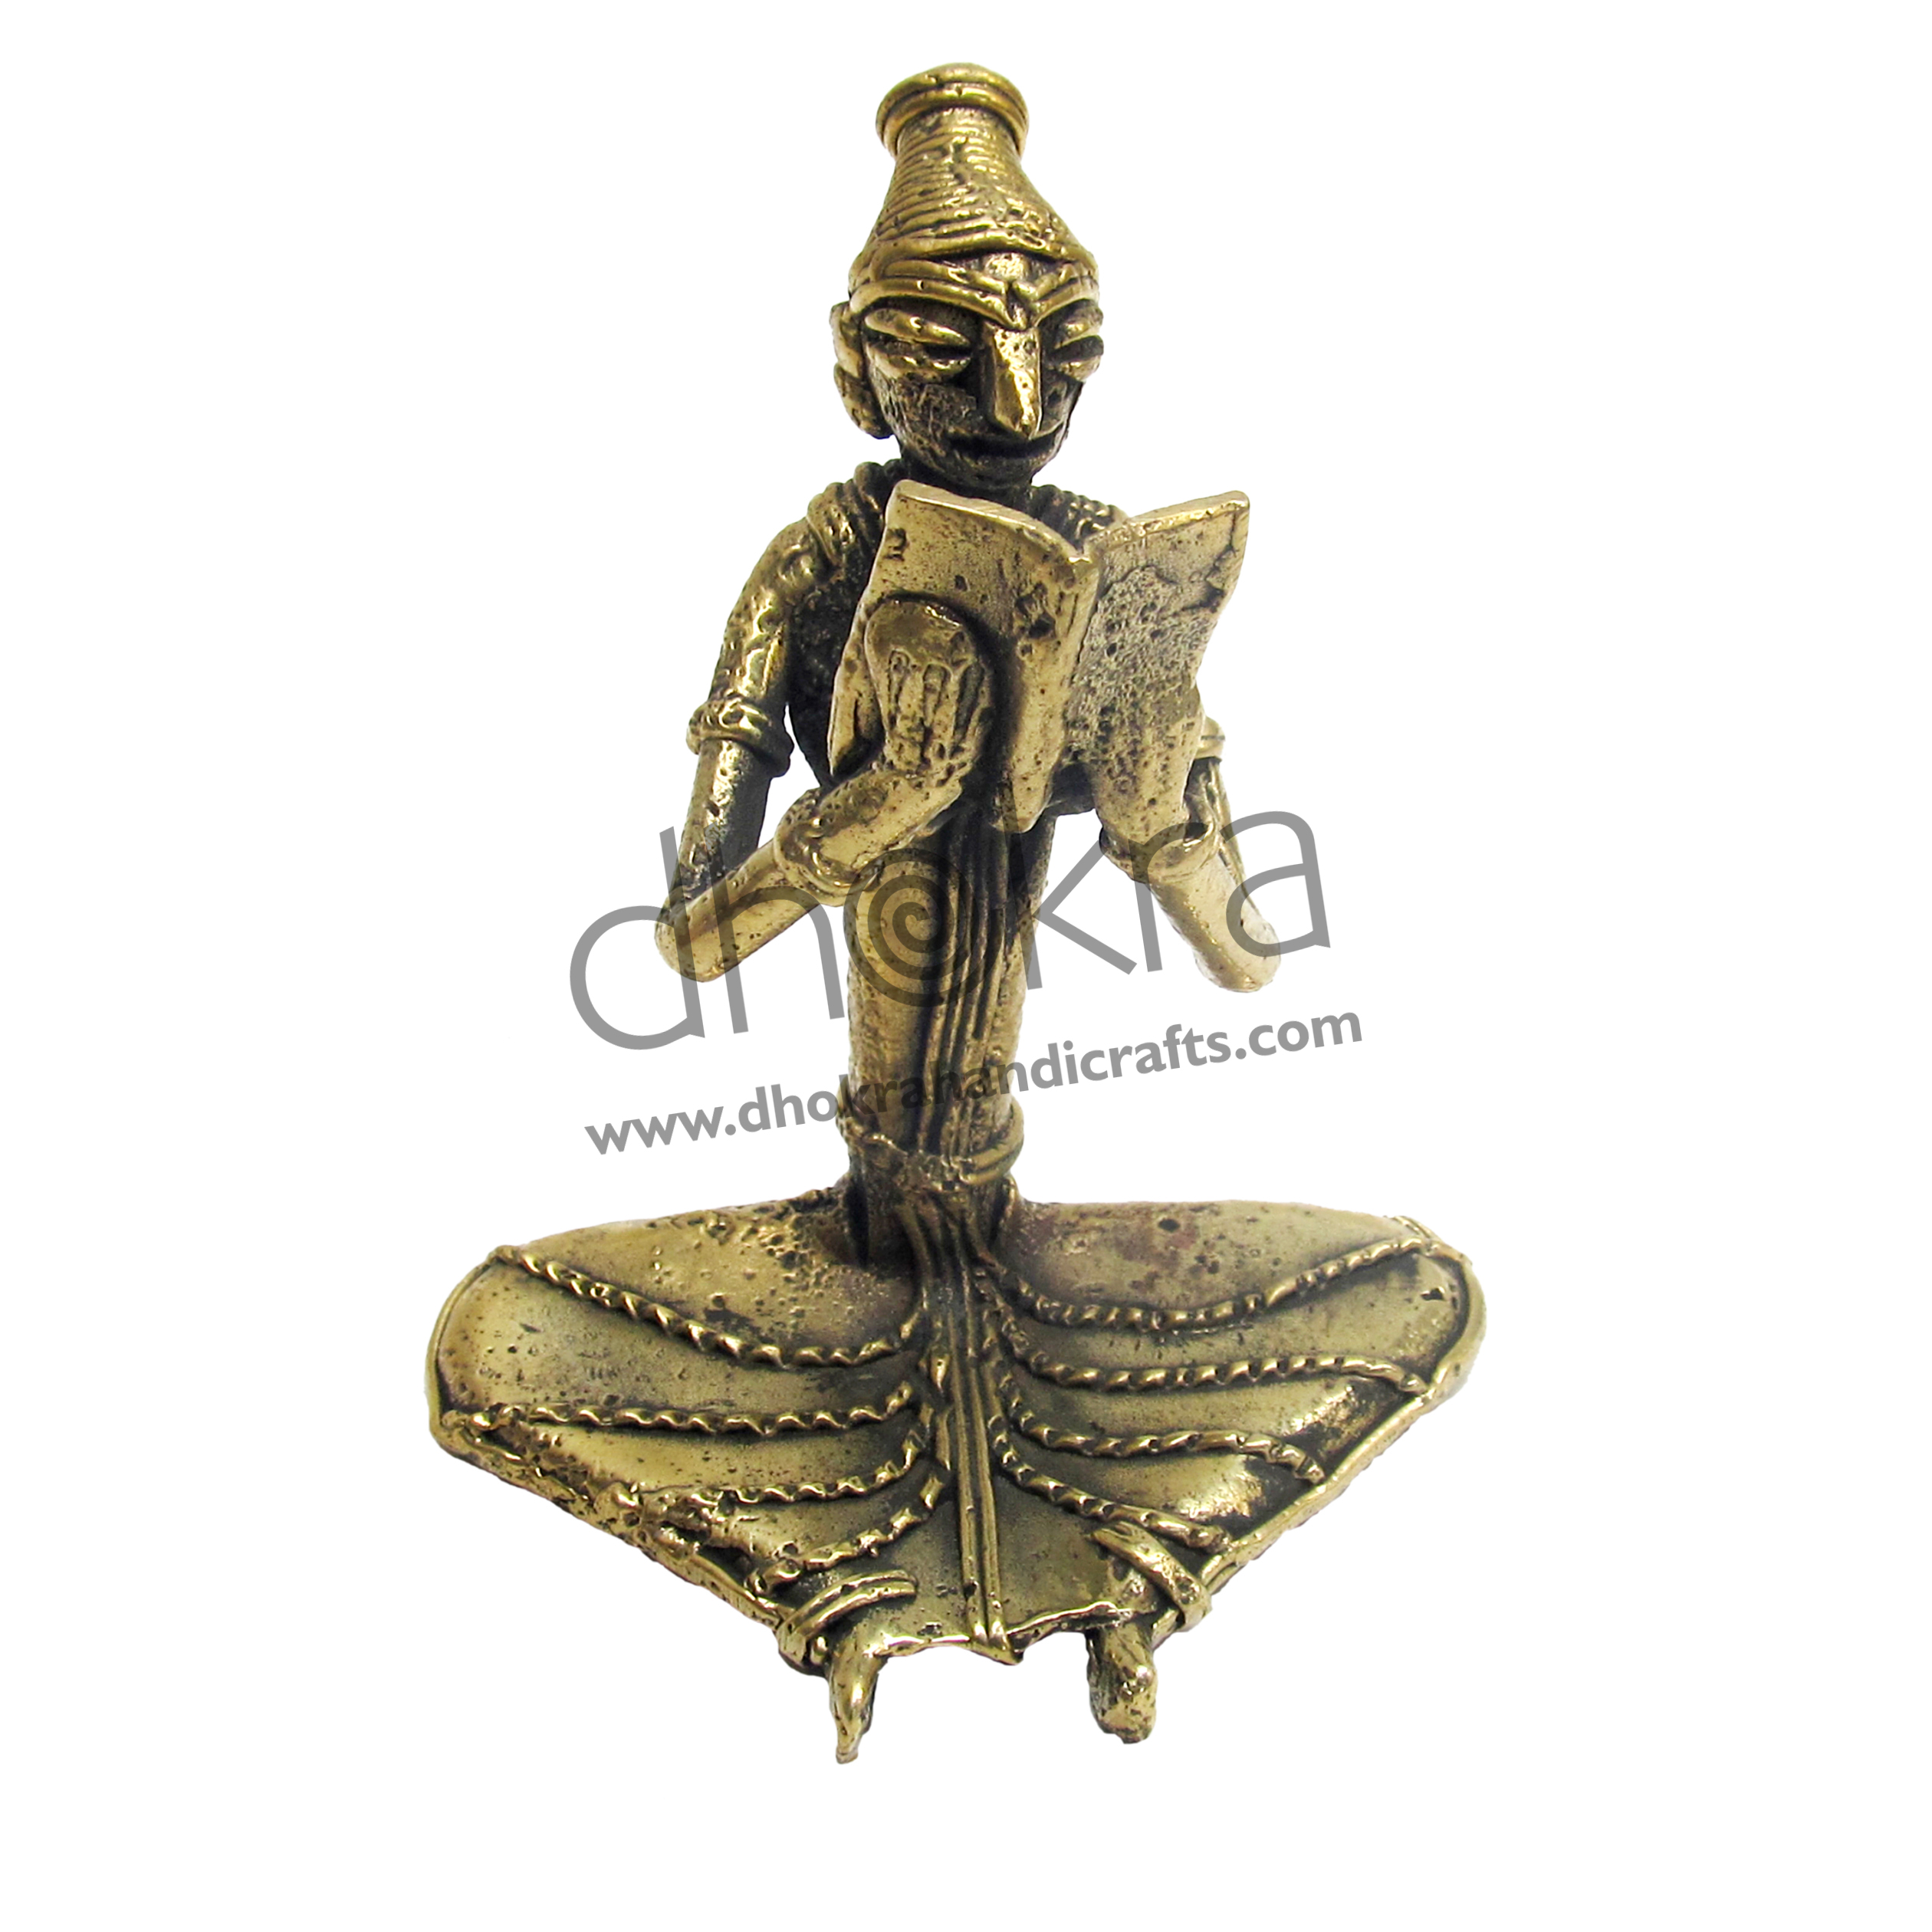 Dhokra Lady with a Book | home decor products | Dhokra